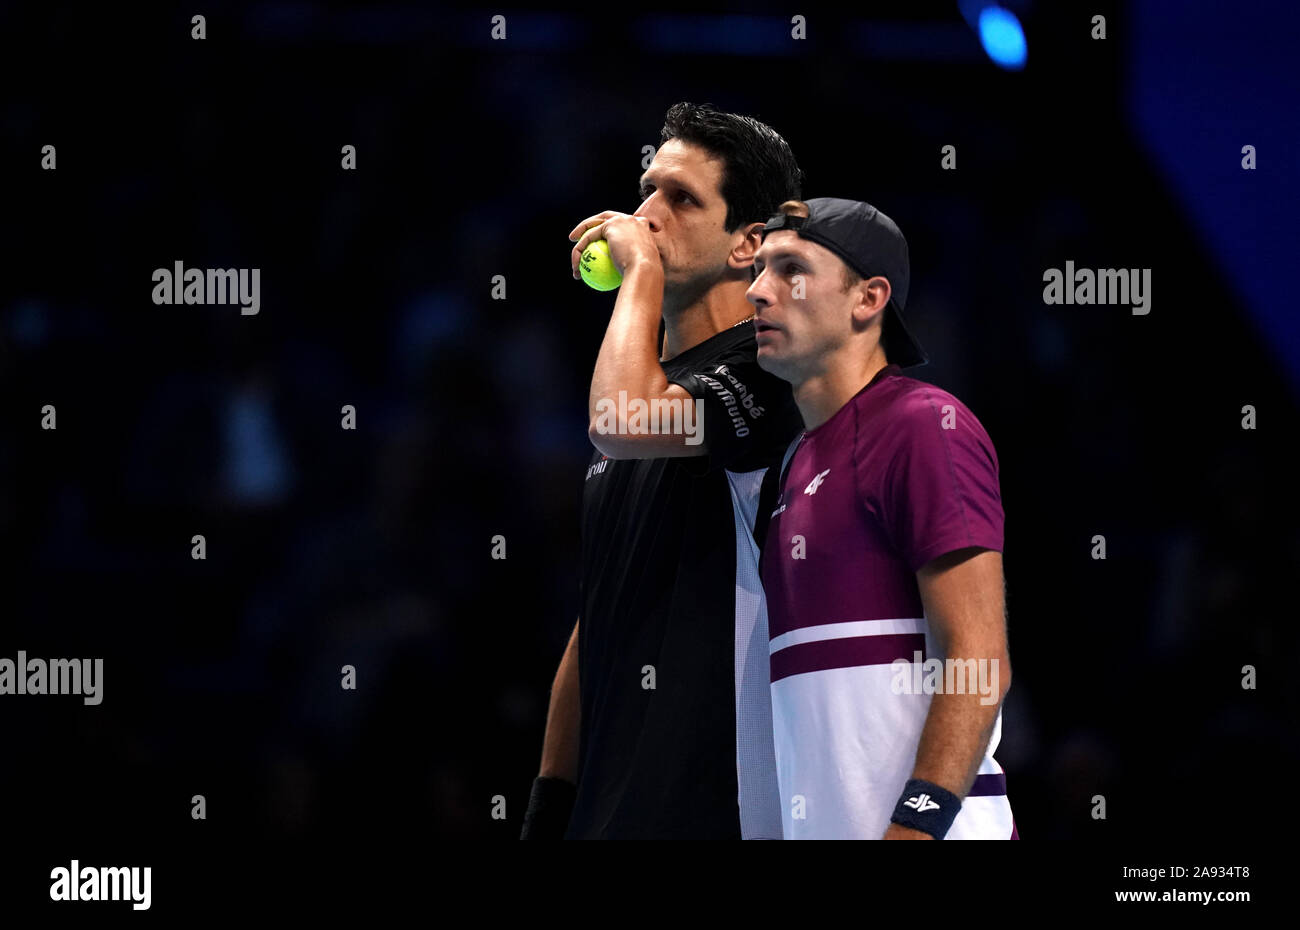 Lukasz Kubot (right) and Marcelo Melo during their doubles match against Raven Klaasen and Michael Venus on day three of the Nitto ATP Finals at The O2 Arena, London. Stock Photo